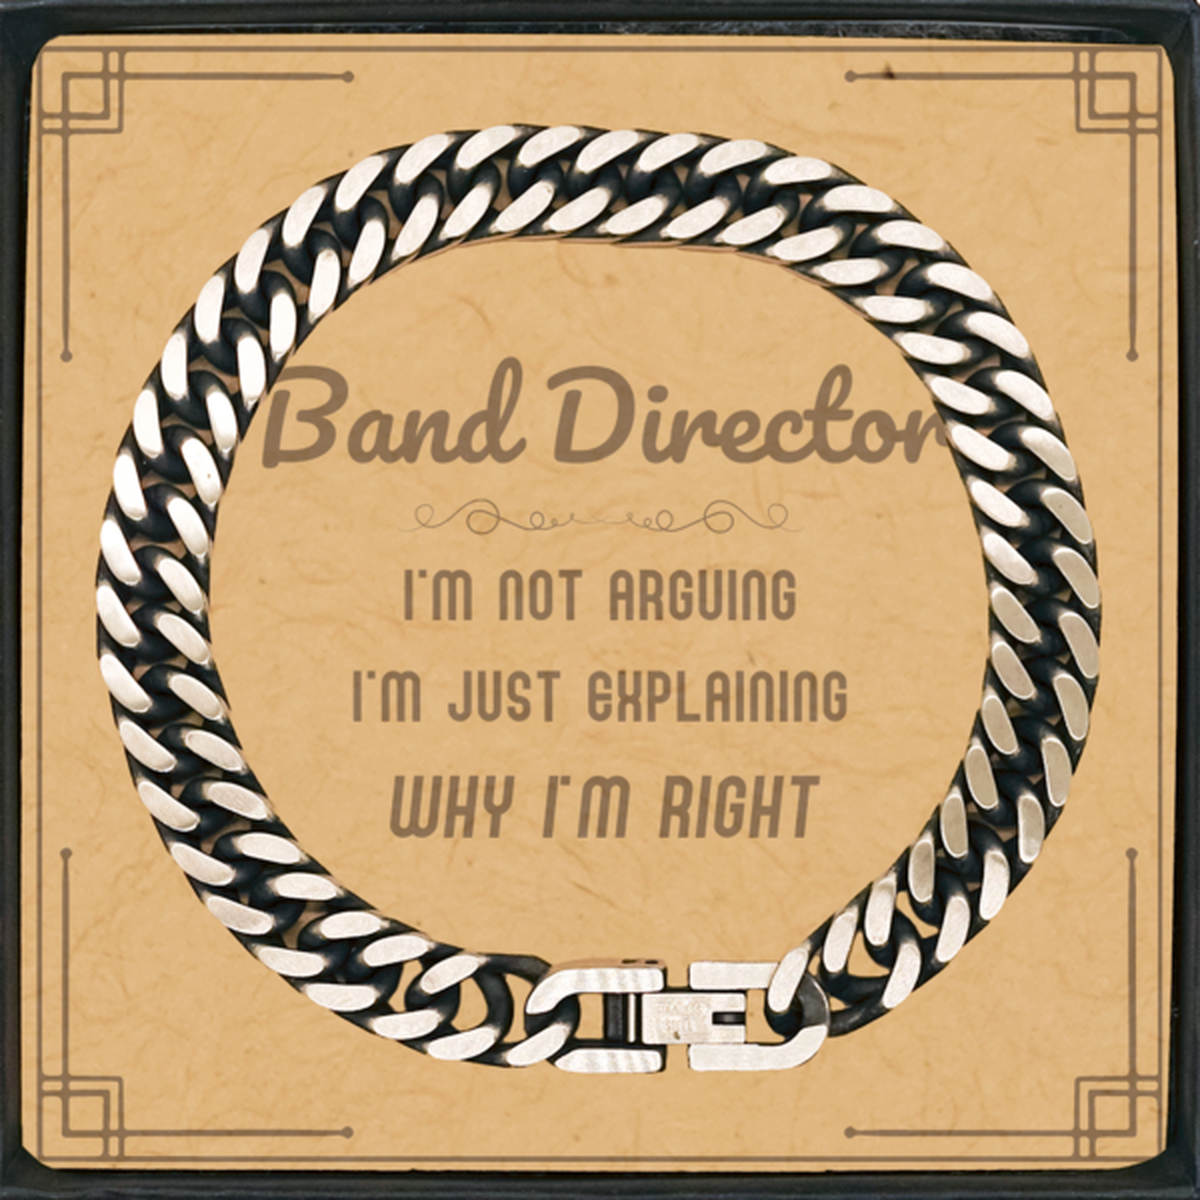 Band Director I'm not Arguing. I'm Just Explaining Why I'm RIGHT Cuban Link Chain Bracelet, Funny Saying Quote Band Director Gifts For Band Director Message Card Graduation Birthday Christmas Gifts for Men Women Coworker